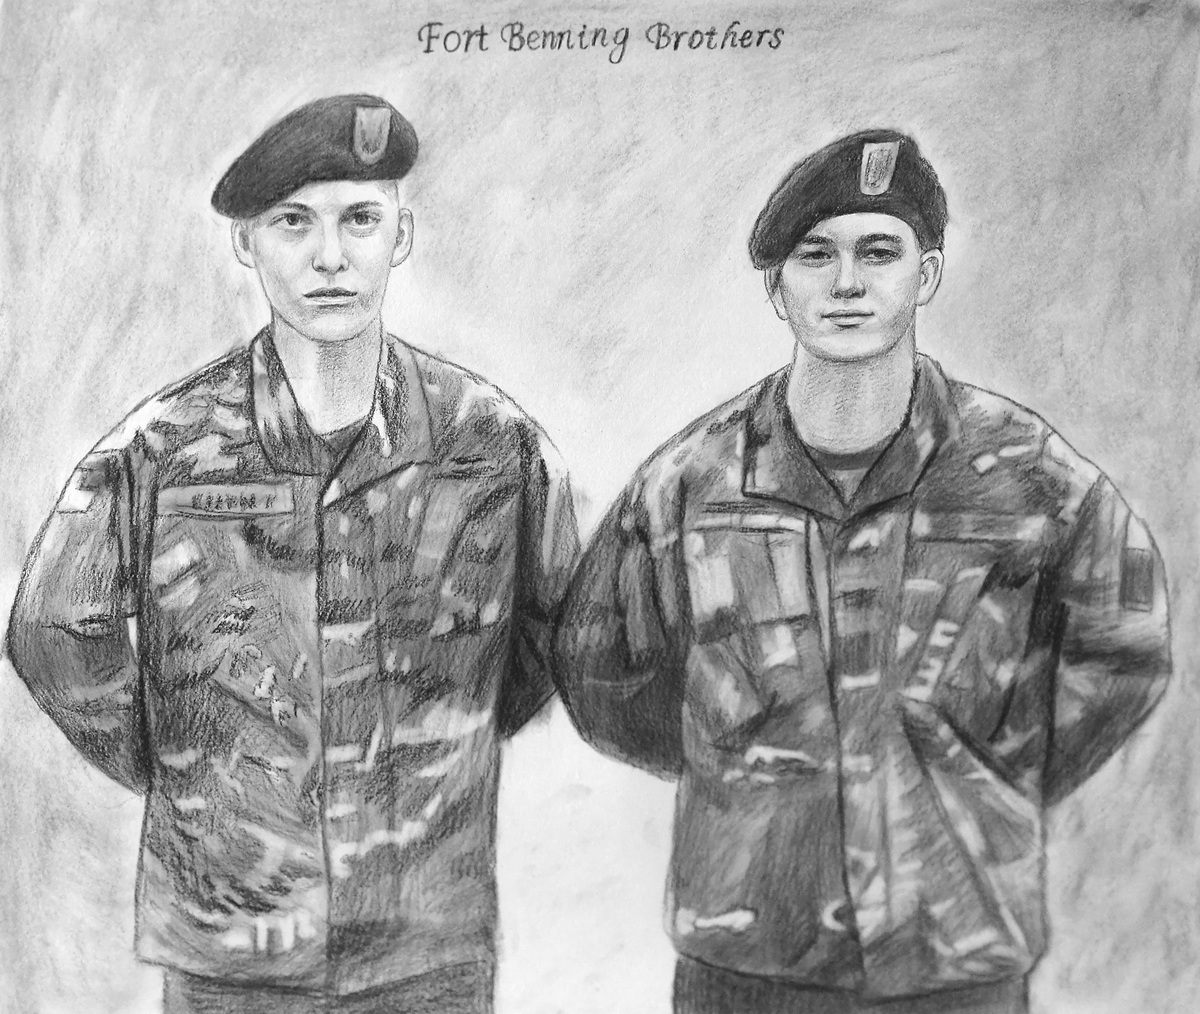 A pencil sketch of two soldiers in uniform.